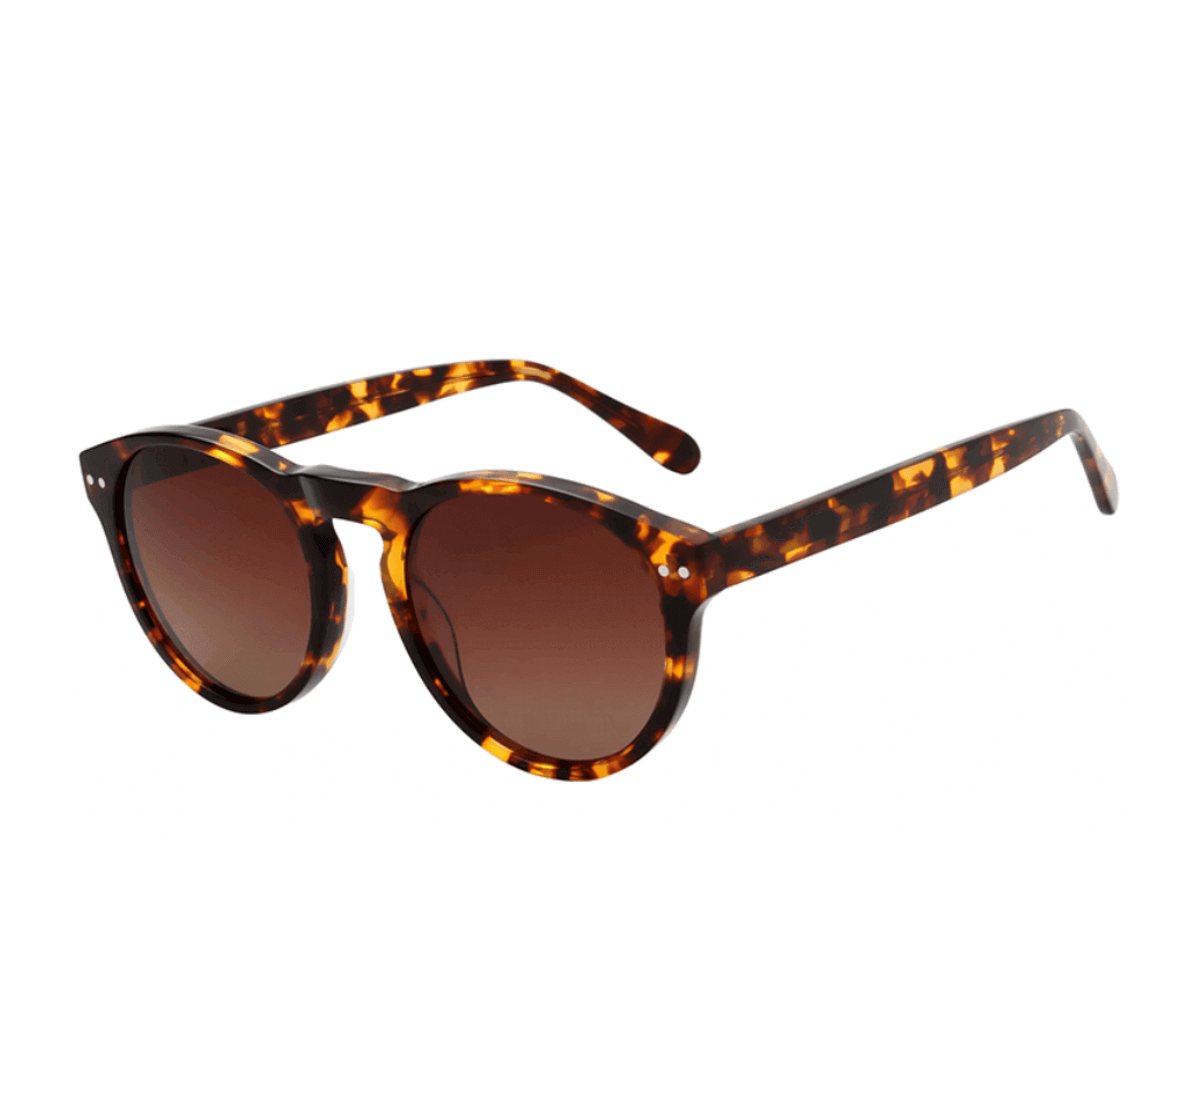 Wholesale Acetate Sunglasses from China Sunglasses Manufacturer and Supplier